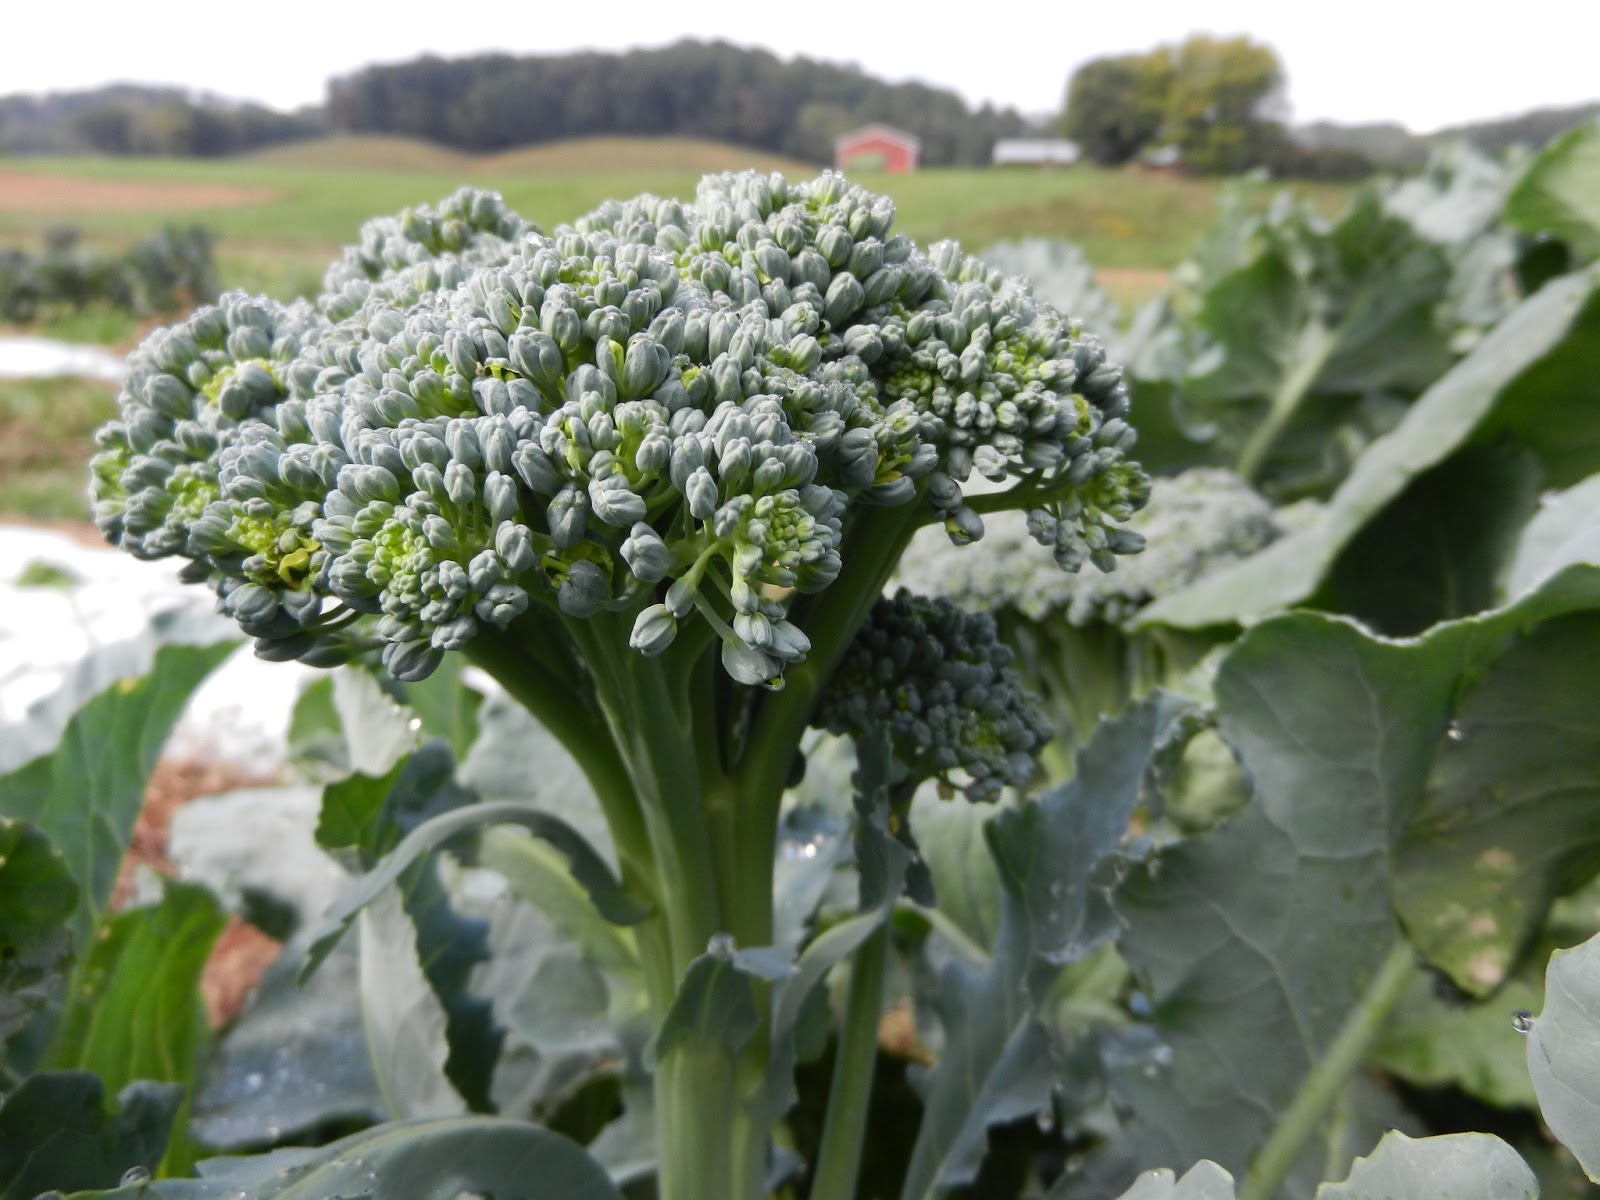 Green Sprouting Calabrese broccoli grown in 2012